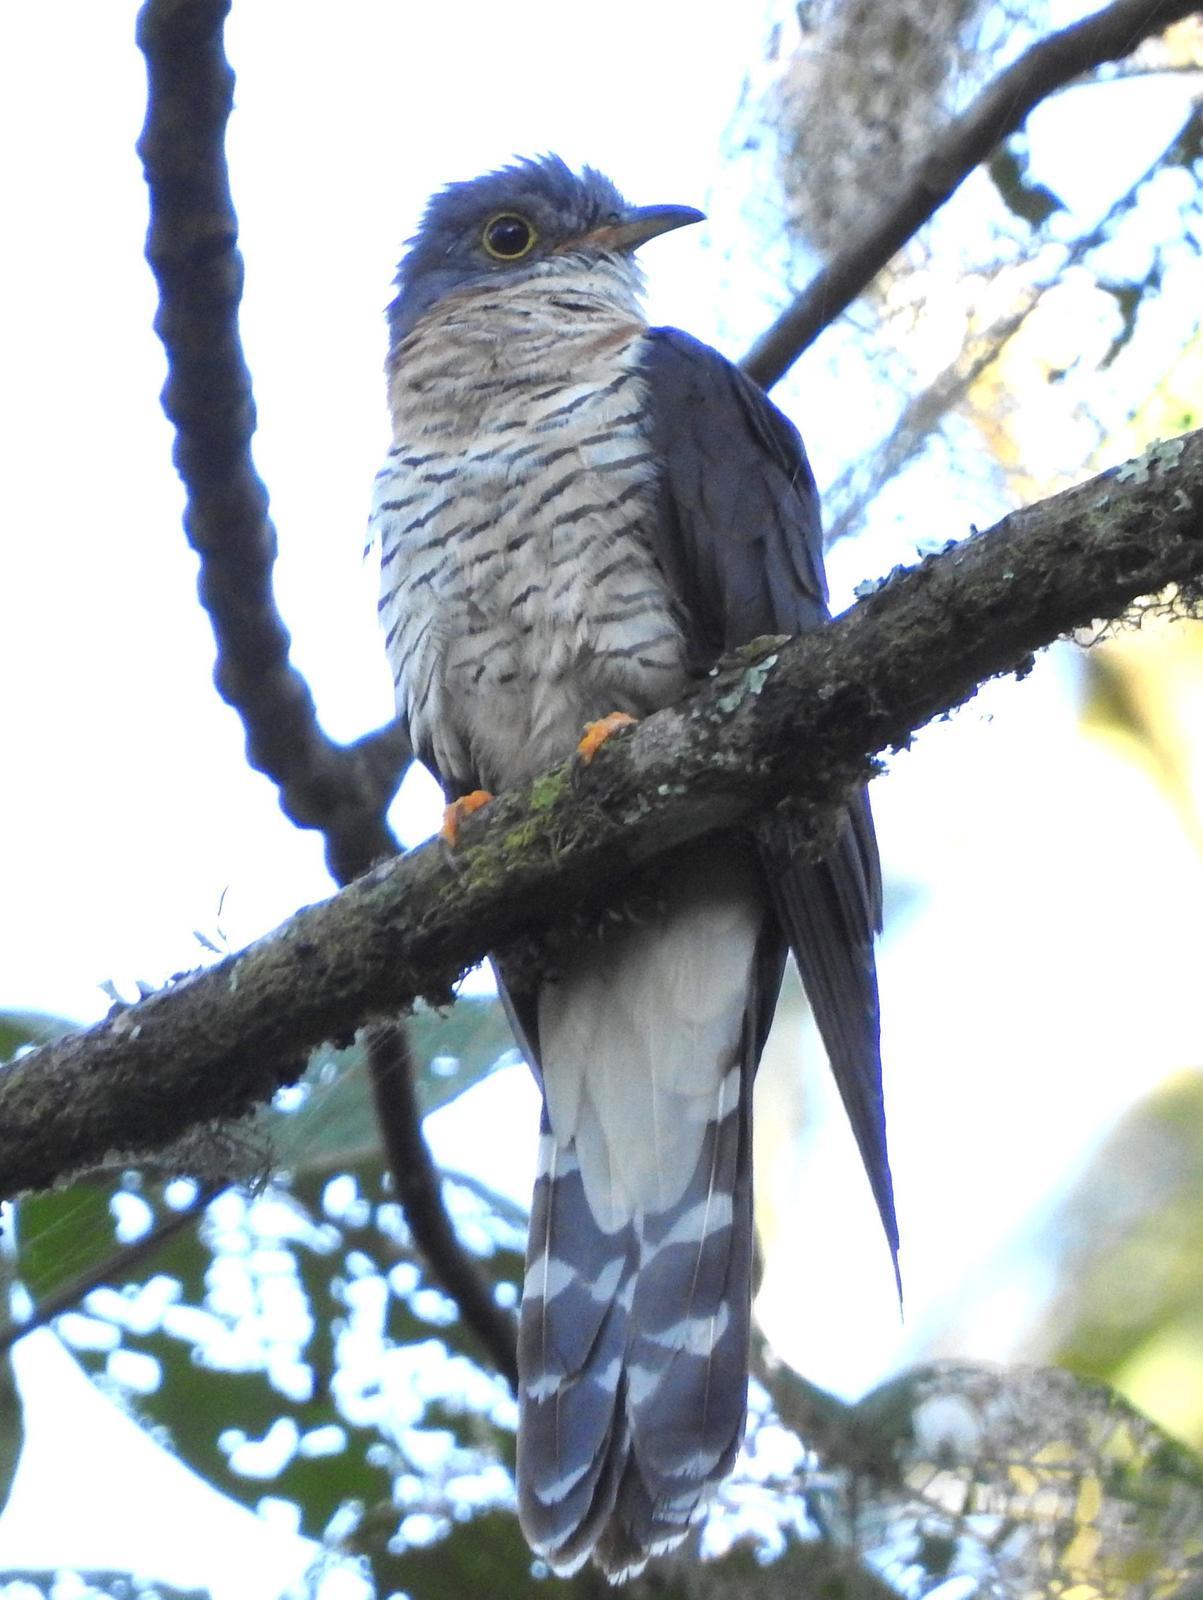 Red-chested Cuckoo Photo by Todd A. Watkins